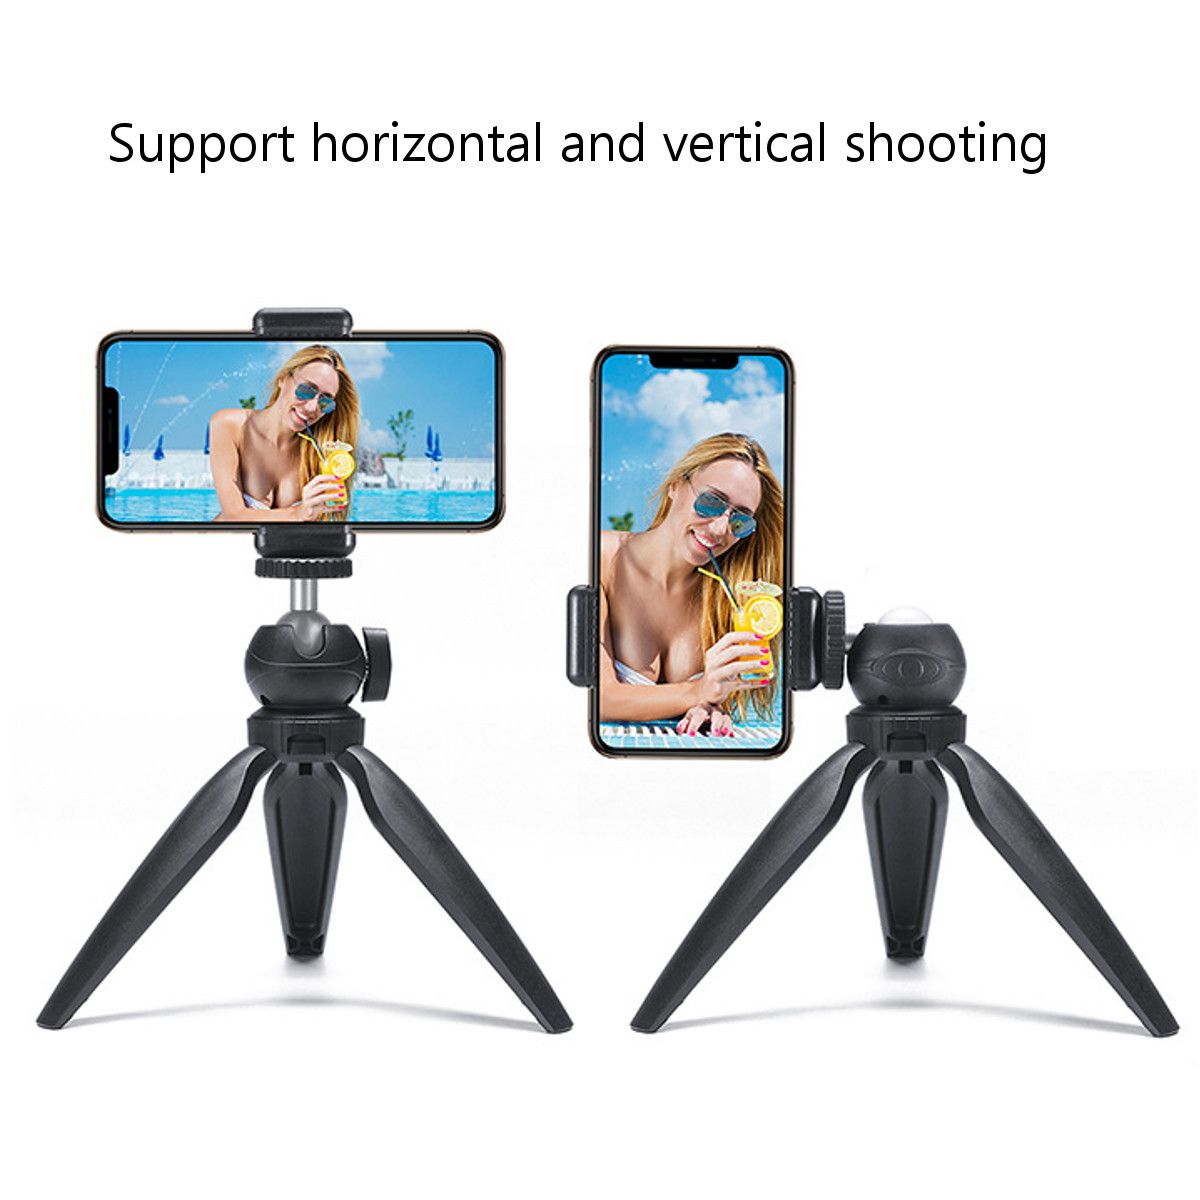 Tripod-Mobile-Phone-Stand-Holder-for-Camera-Phone-Selfie-Photography-Vlog-Live-Broadcast-1723888